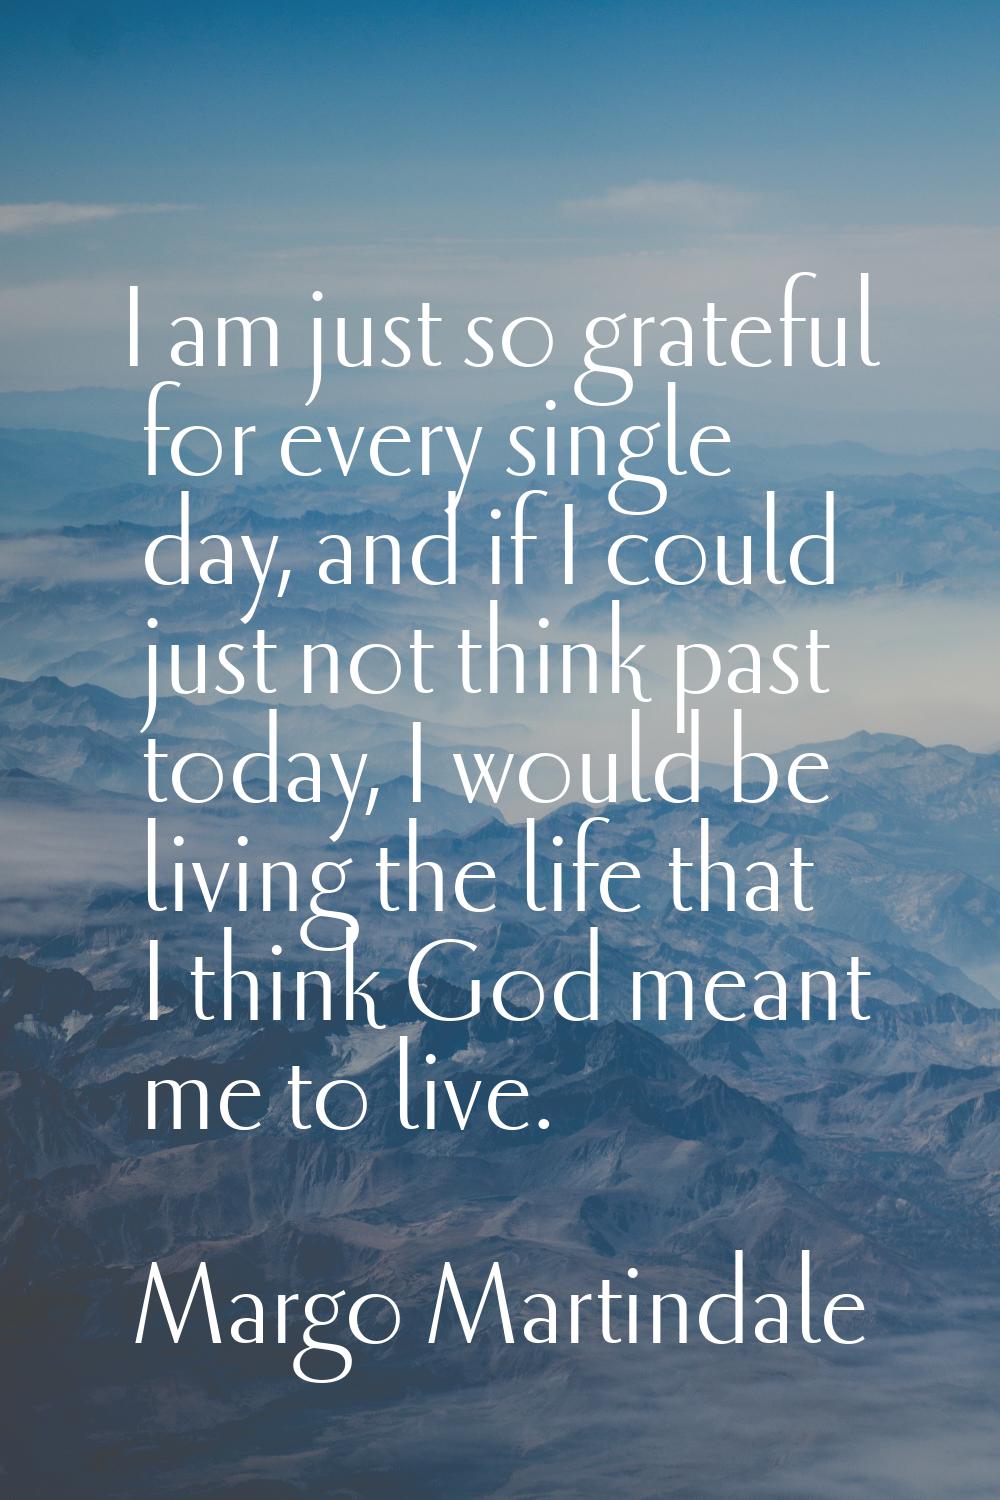 I am just so grateful for every single day, and if I could just not think past today, I would be li